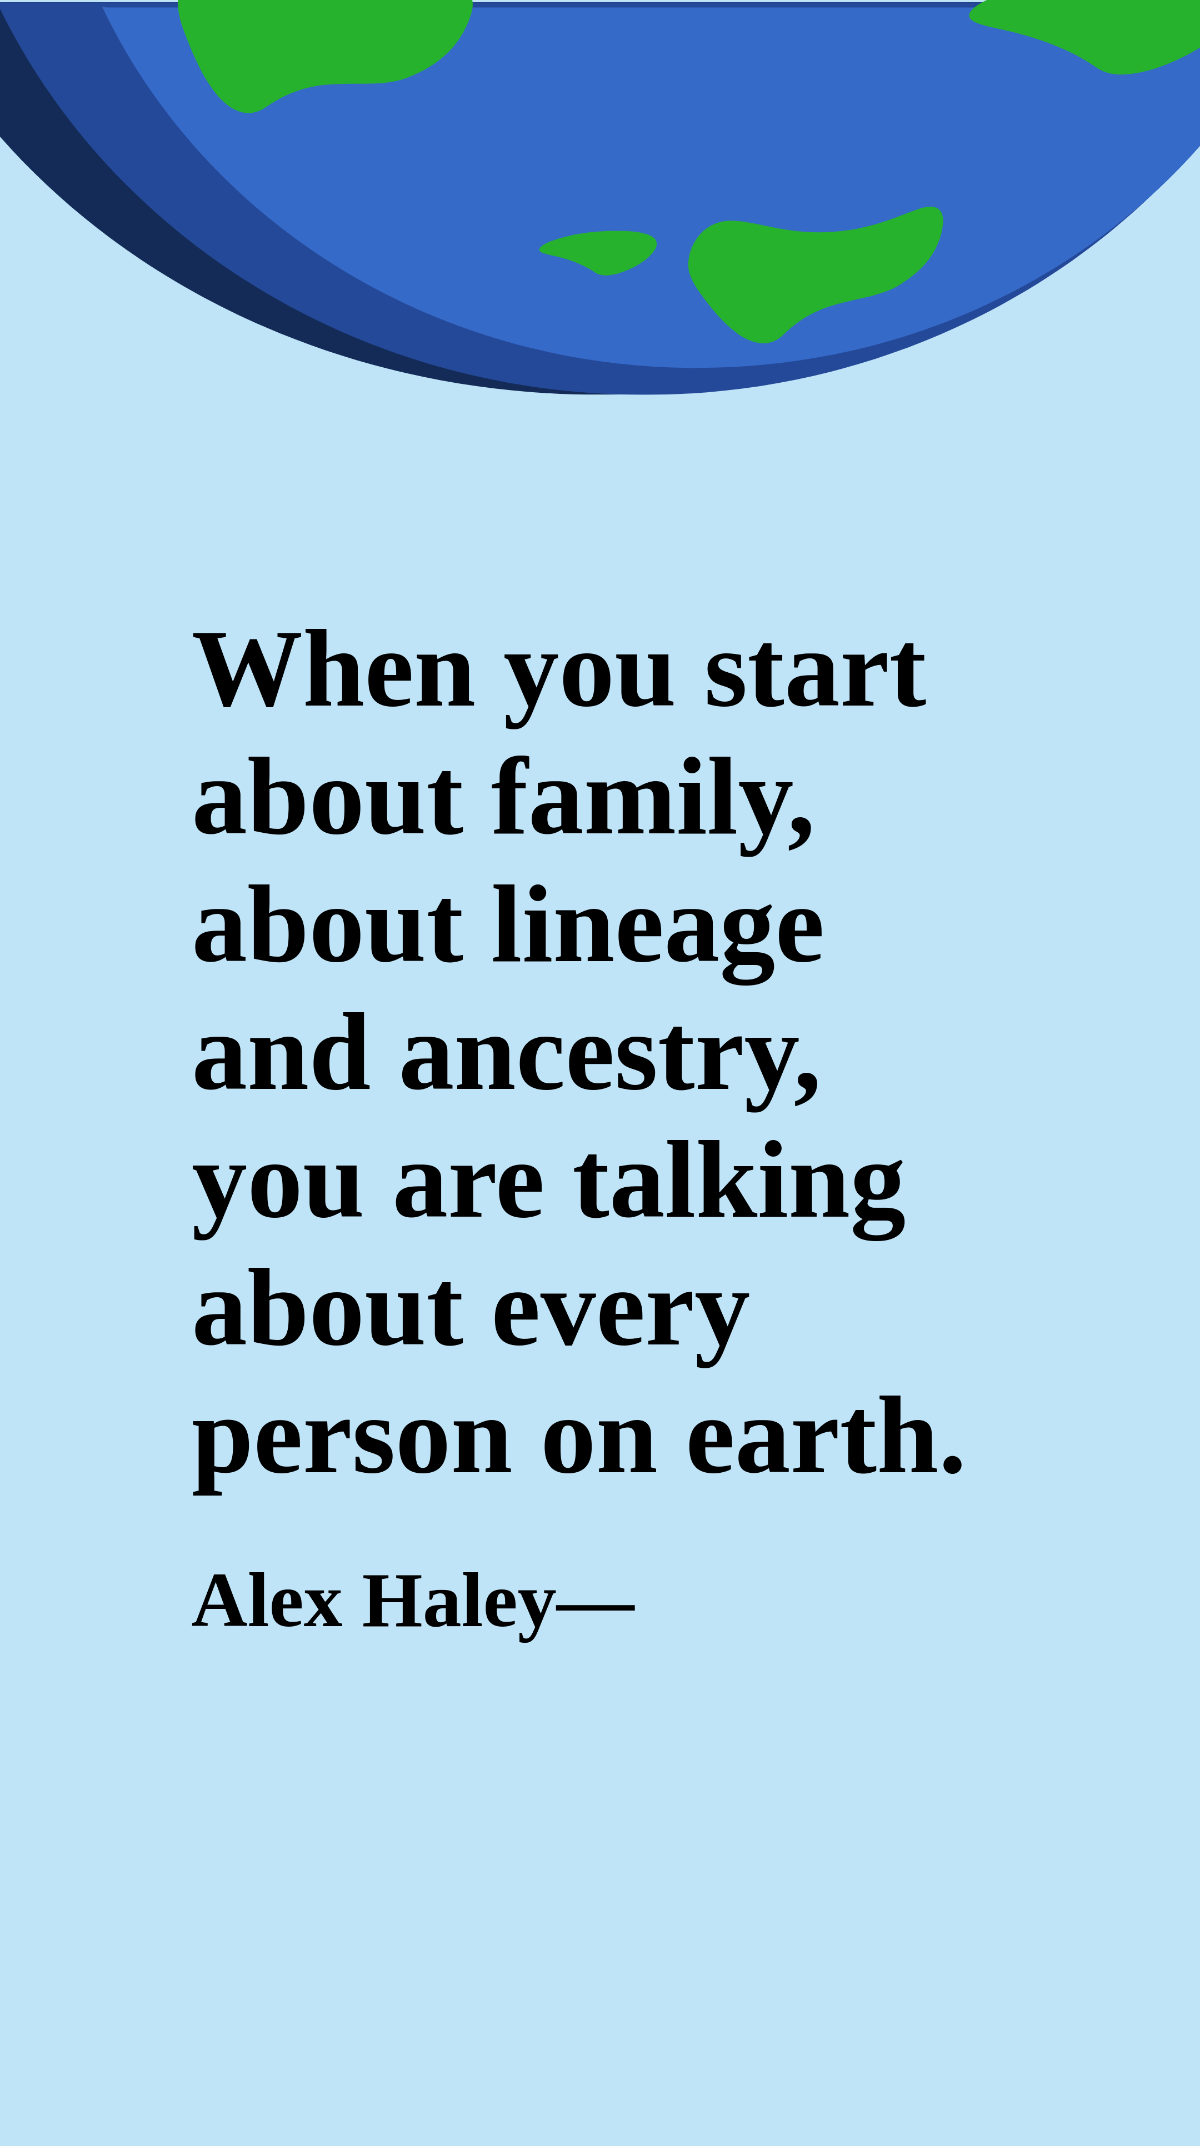 Alex Haley - When you start about family, about lineage and ancestry ...